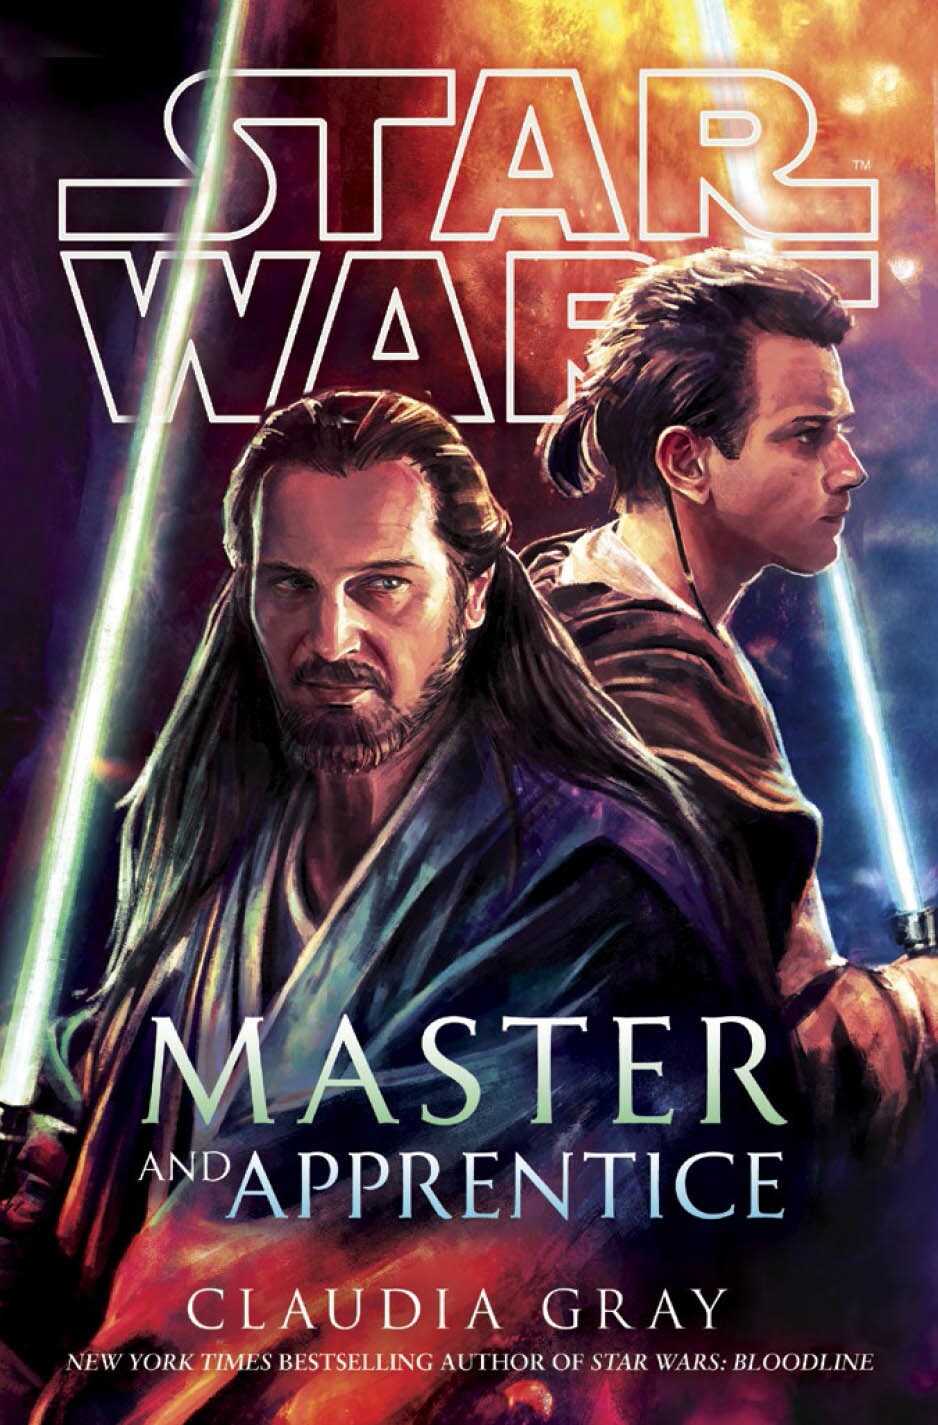 The cover of the novel Master and Apprentice, by Claudia Gray, shows Qui-Gon Jinn and Obi-Wan Kenobi standing back-to-back wielding lightsabers.